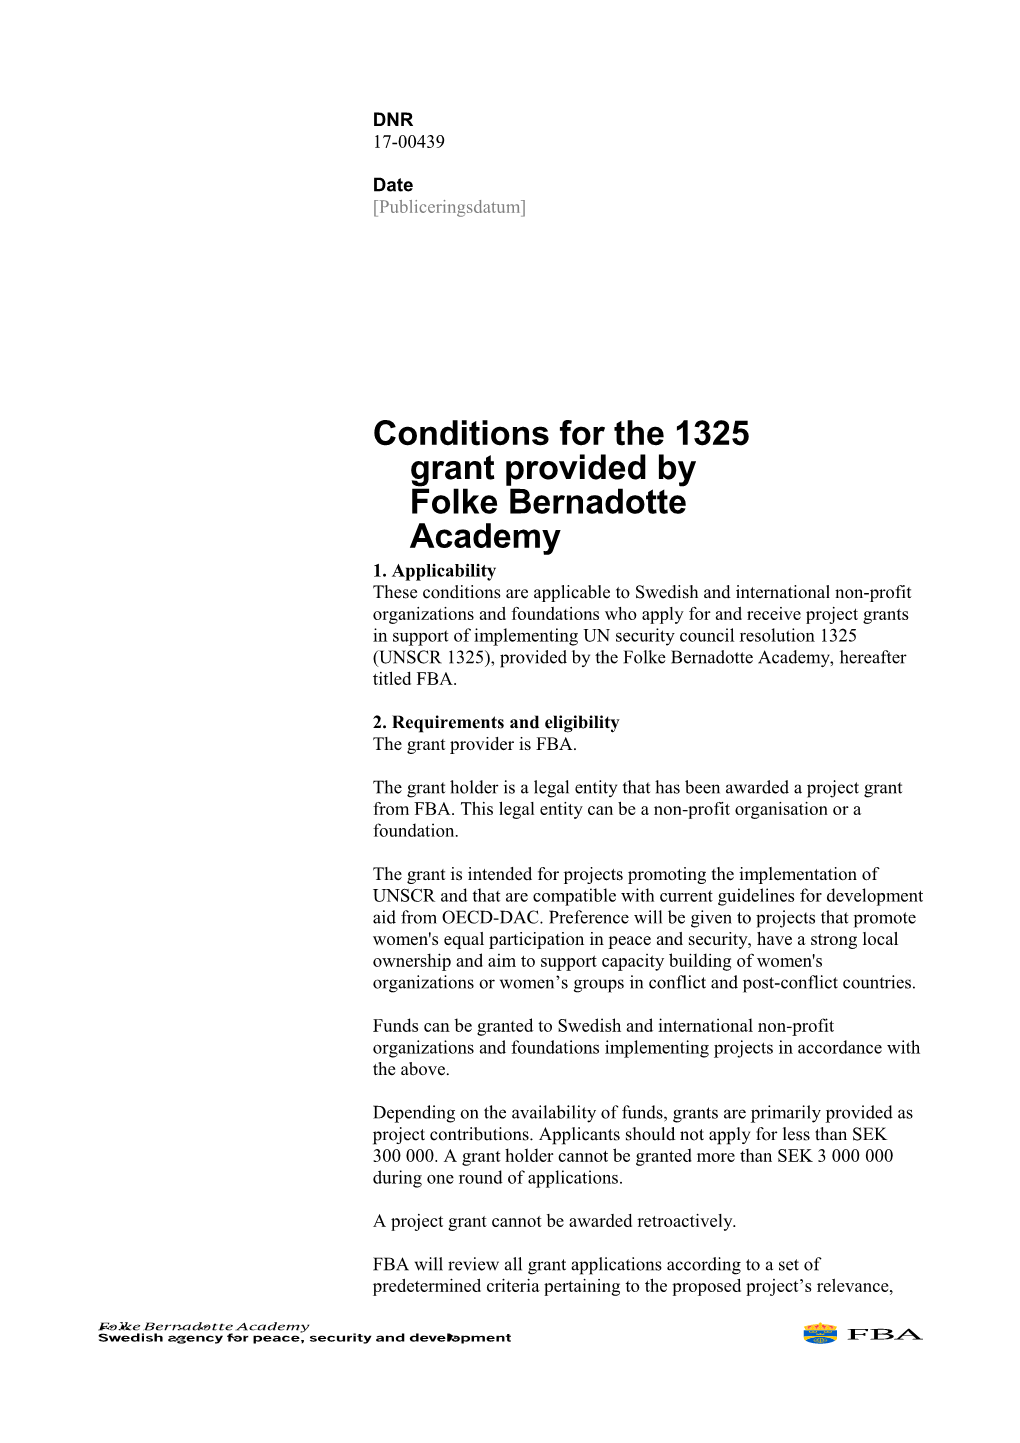 Conditions for the 1325 Grant Provided Byfolke Bernadotte Academy